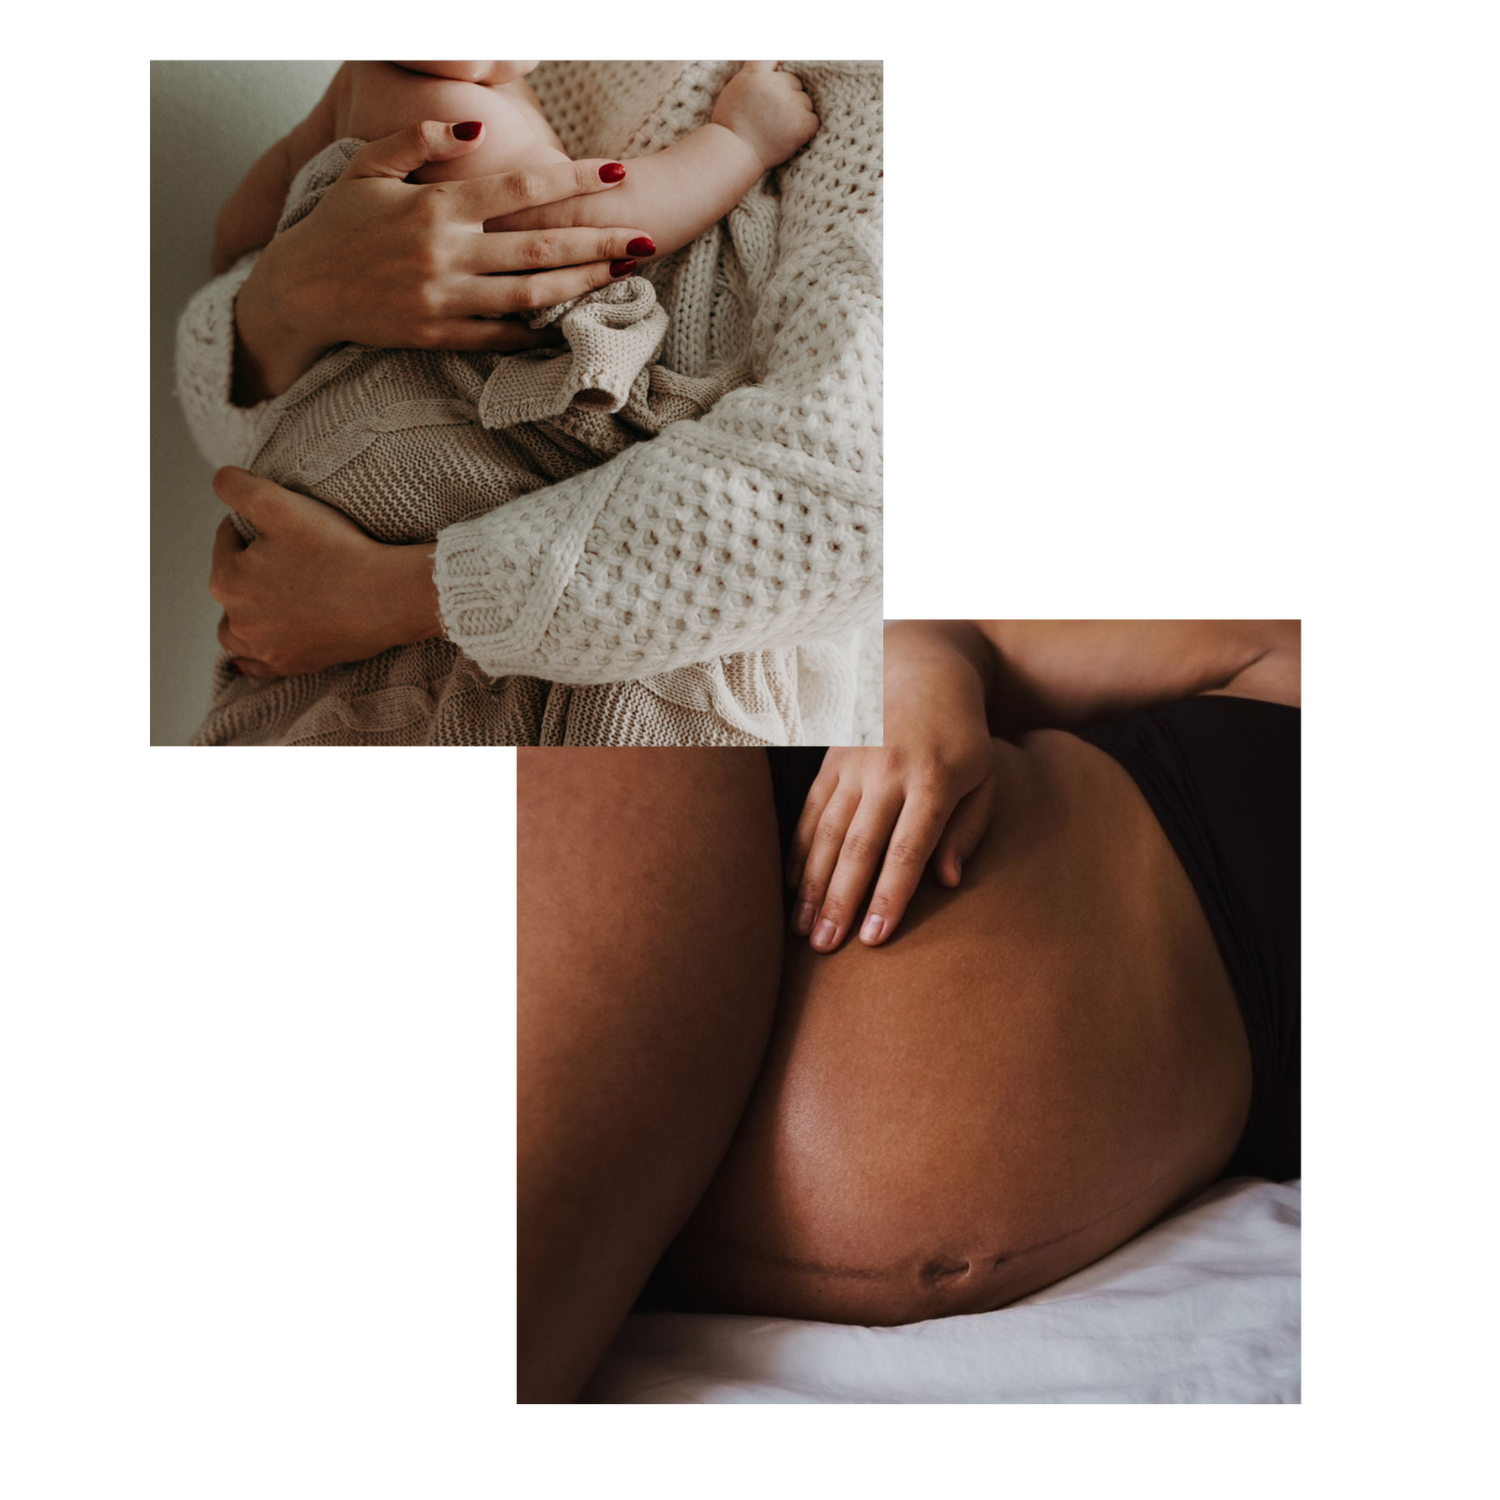 A collage of images: The first is of a woman holding a baby. The next is of a pregnant belly.